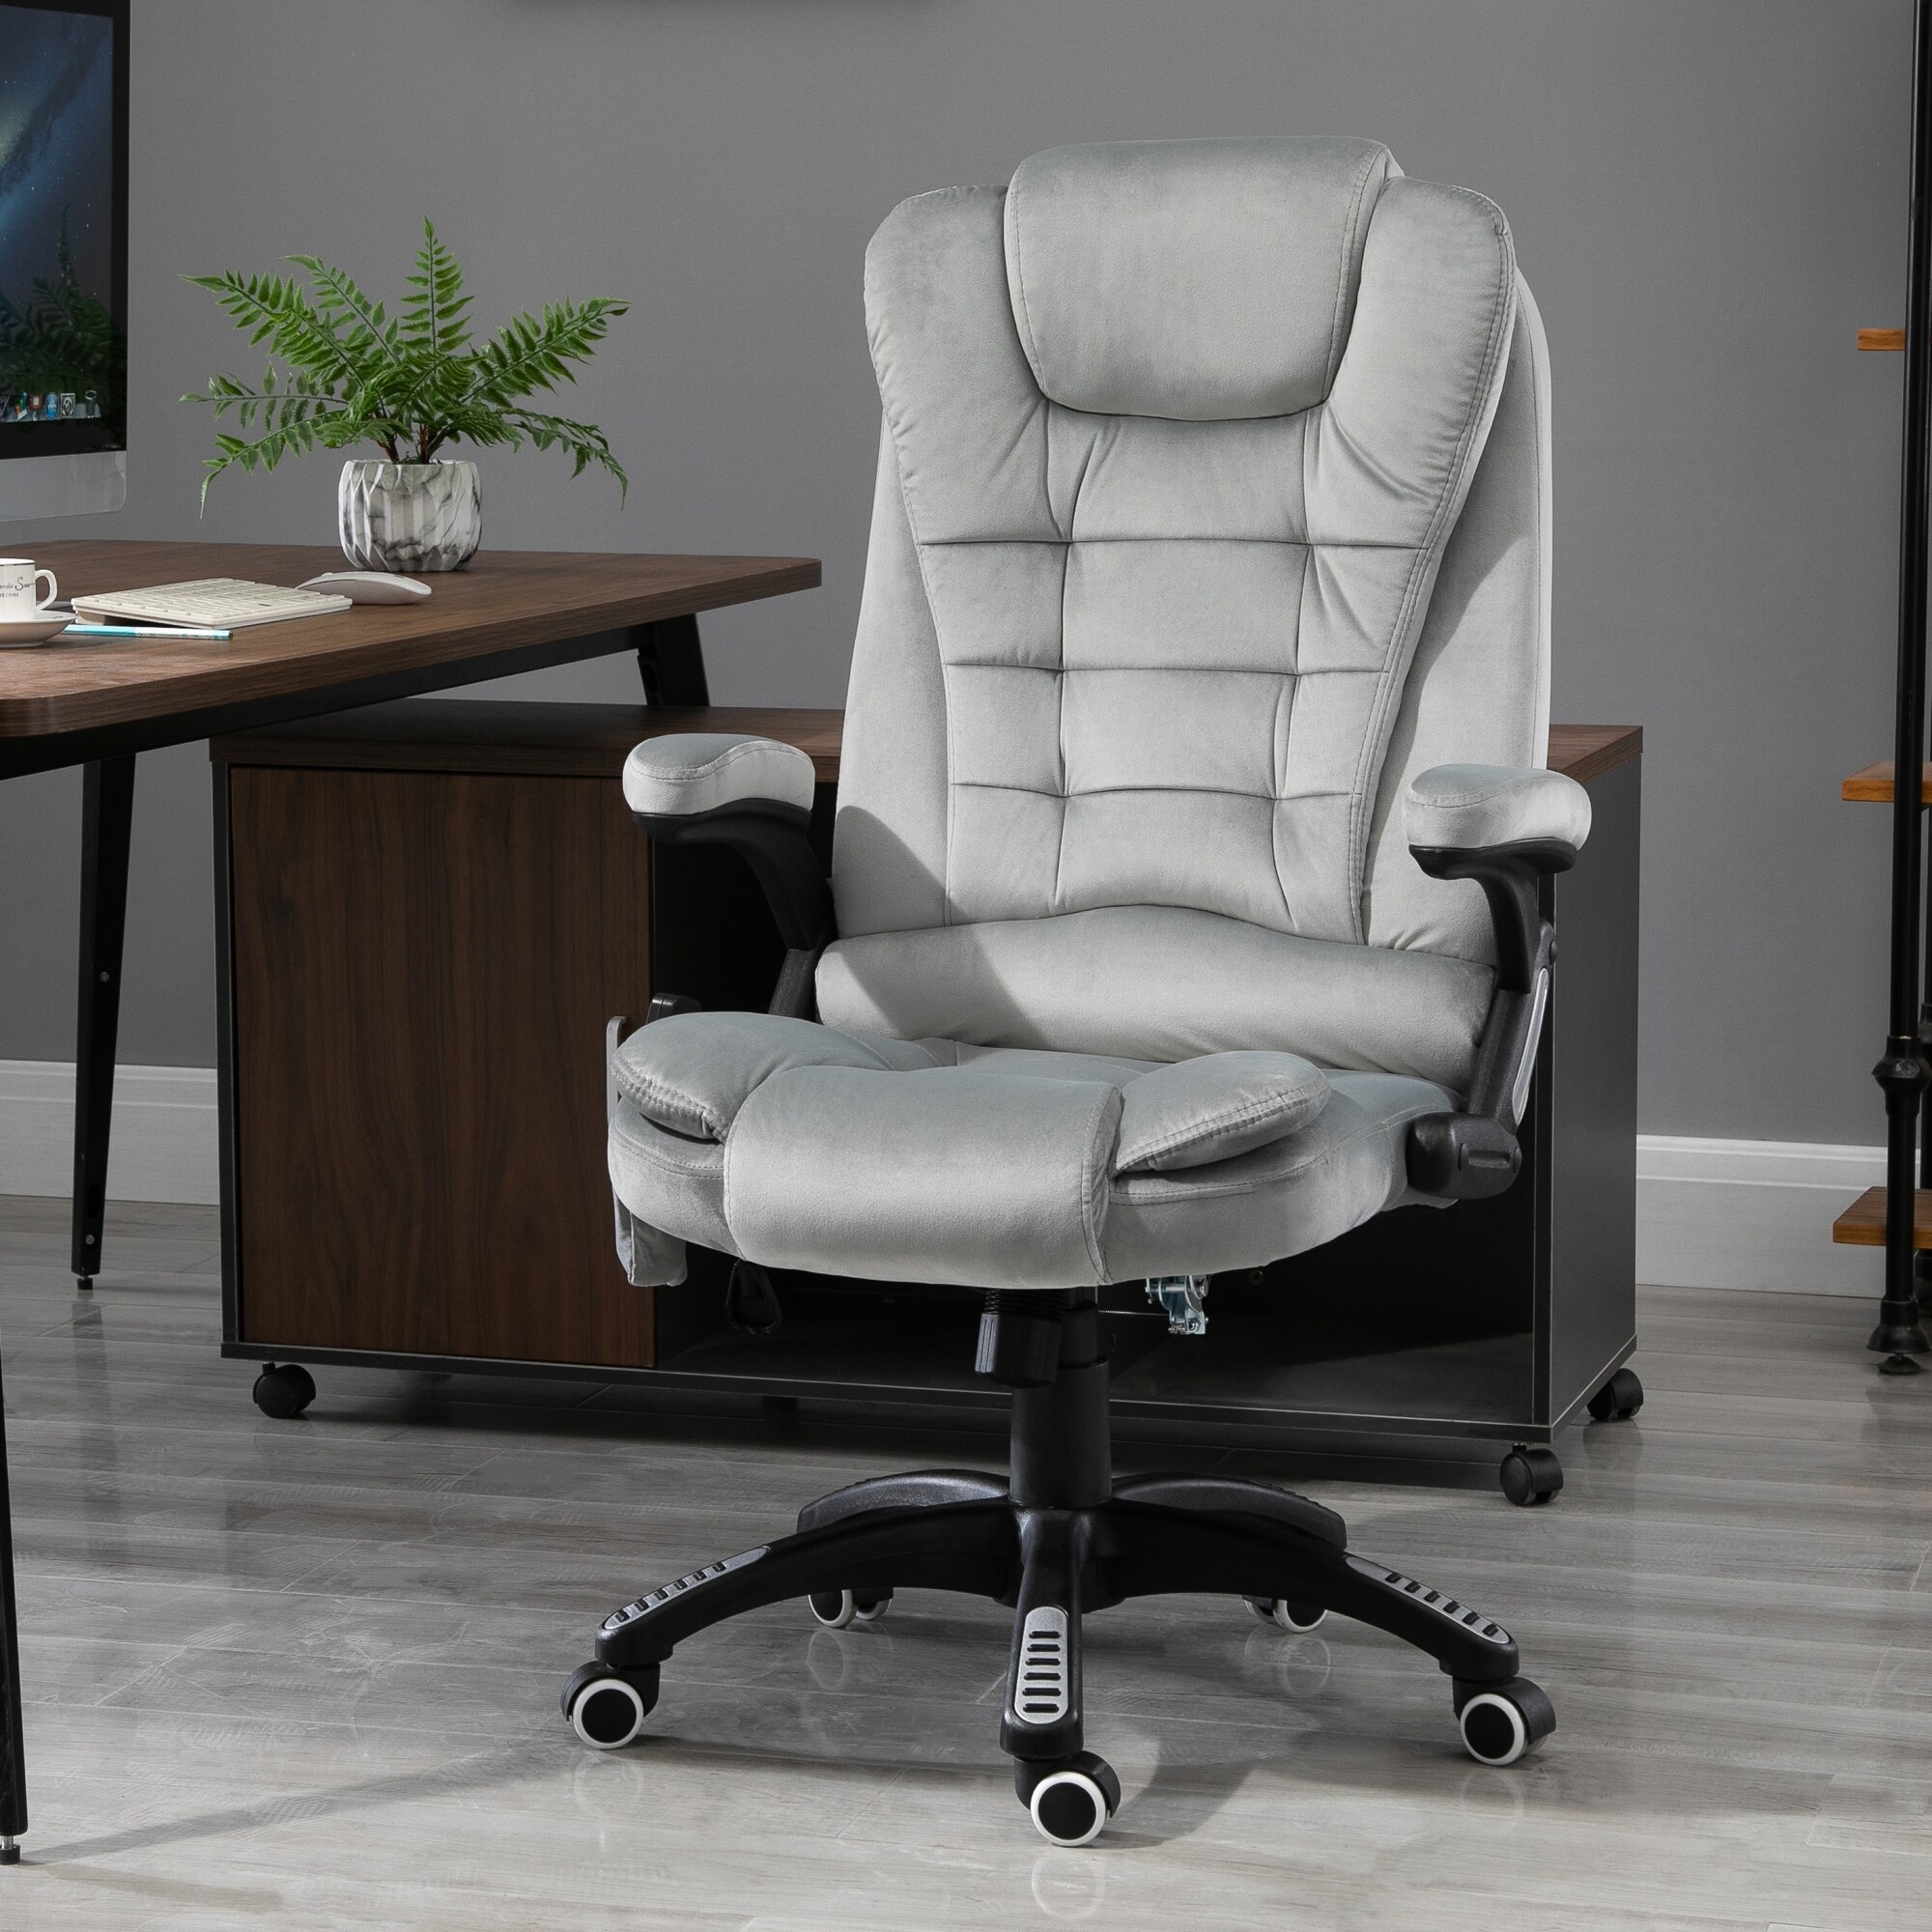 https://ak1.ostkcdn.com/images/products/is/images/direct/c039216ddfc5fa66c34e4f5dac283e602bcc2c82/Vinsetto-Ergonomic-Massage-Office-Chair-High-Back-Executive-Chair-with-Lumbar-Support-Armrest.jpg